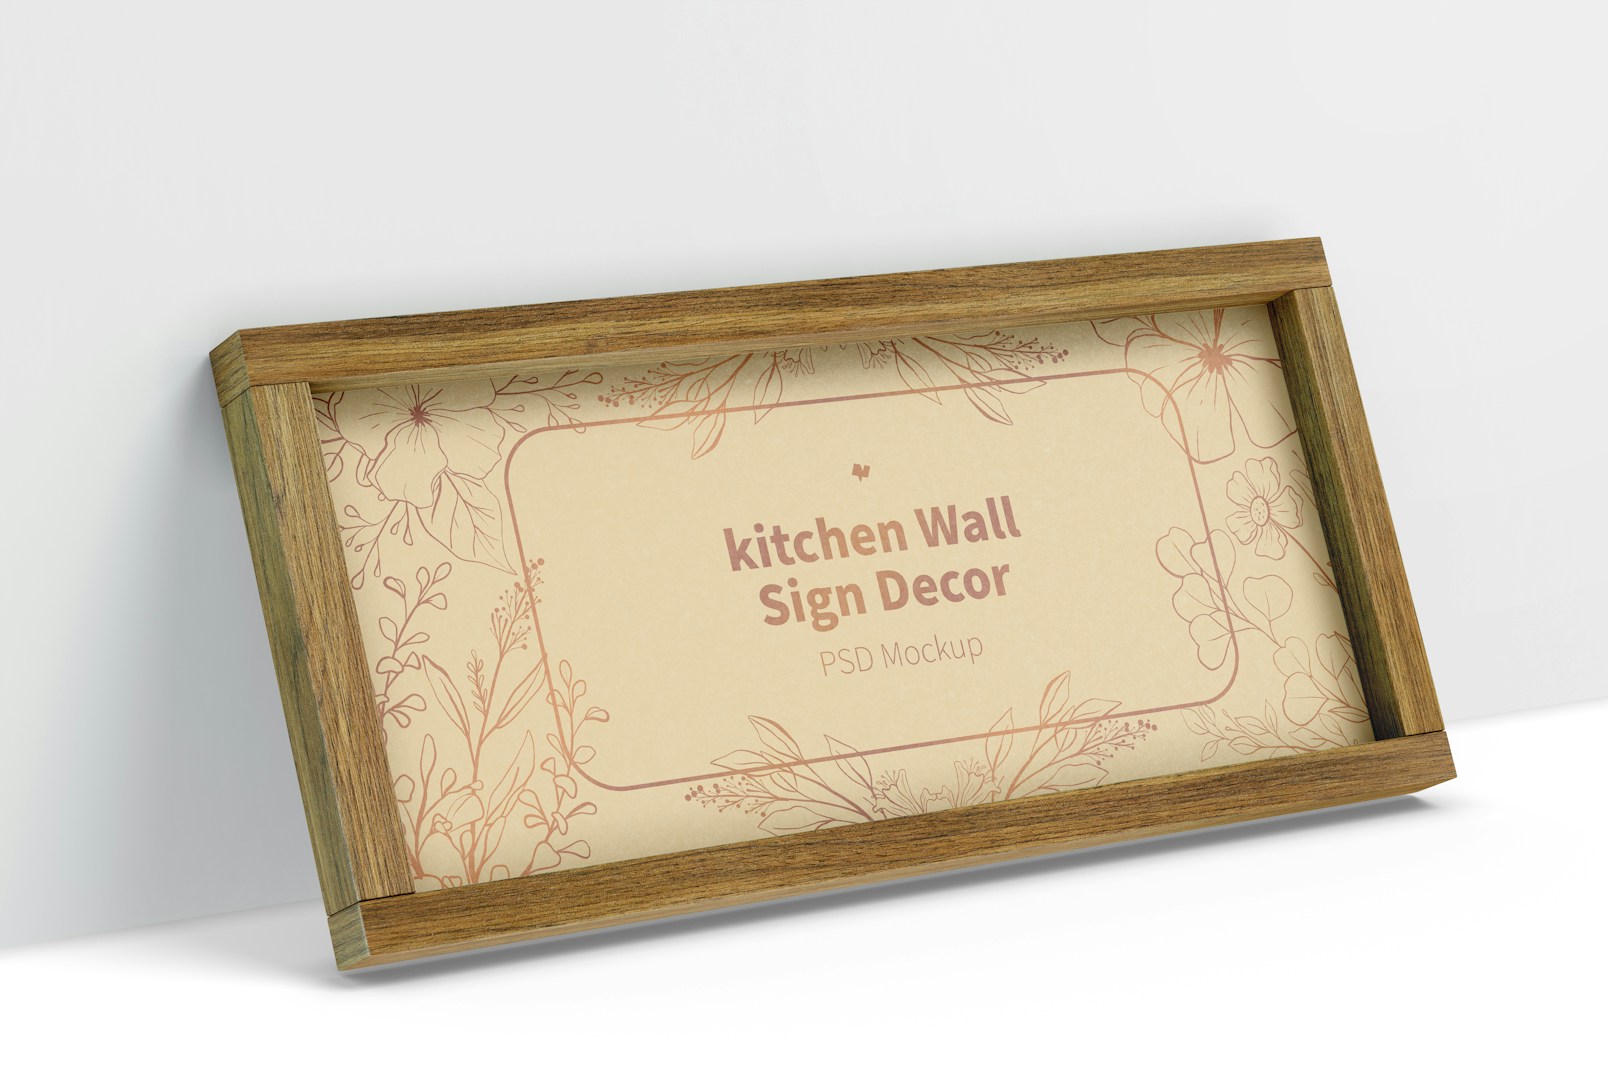 Kitchen Wall Sign Decor Mockup, Leaned